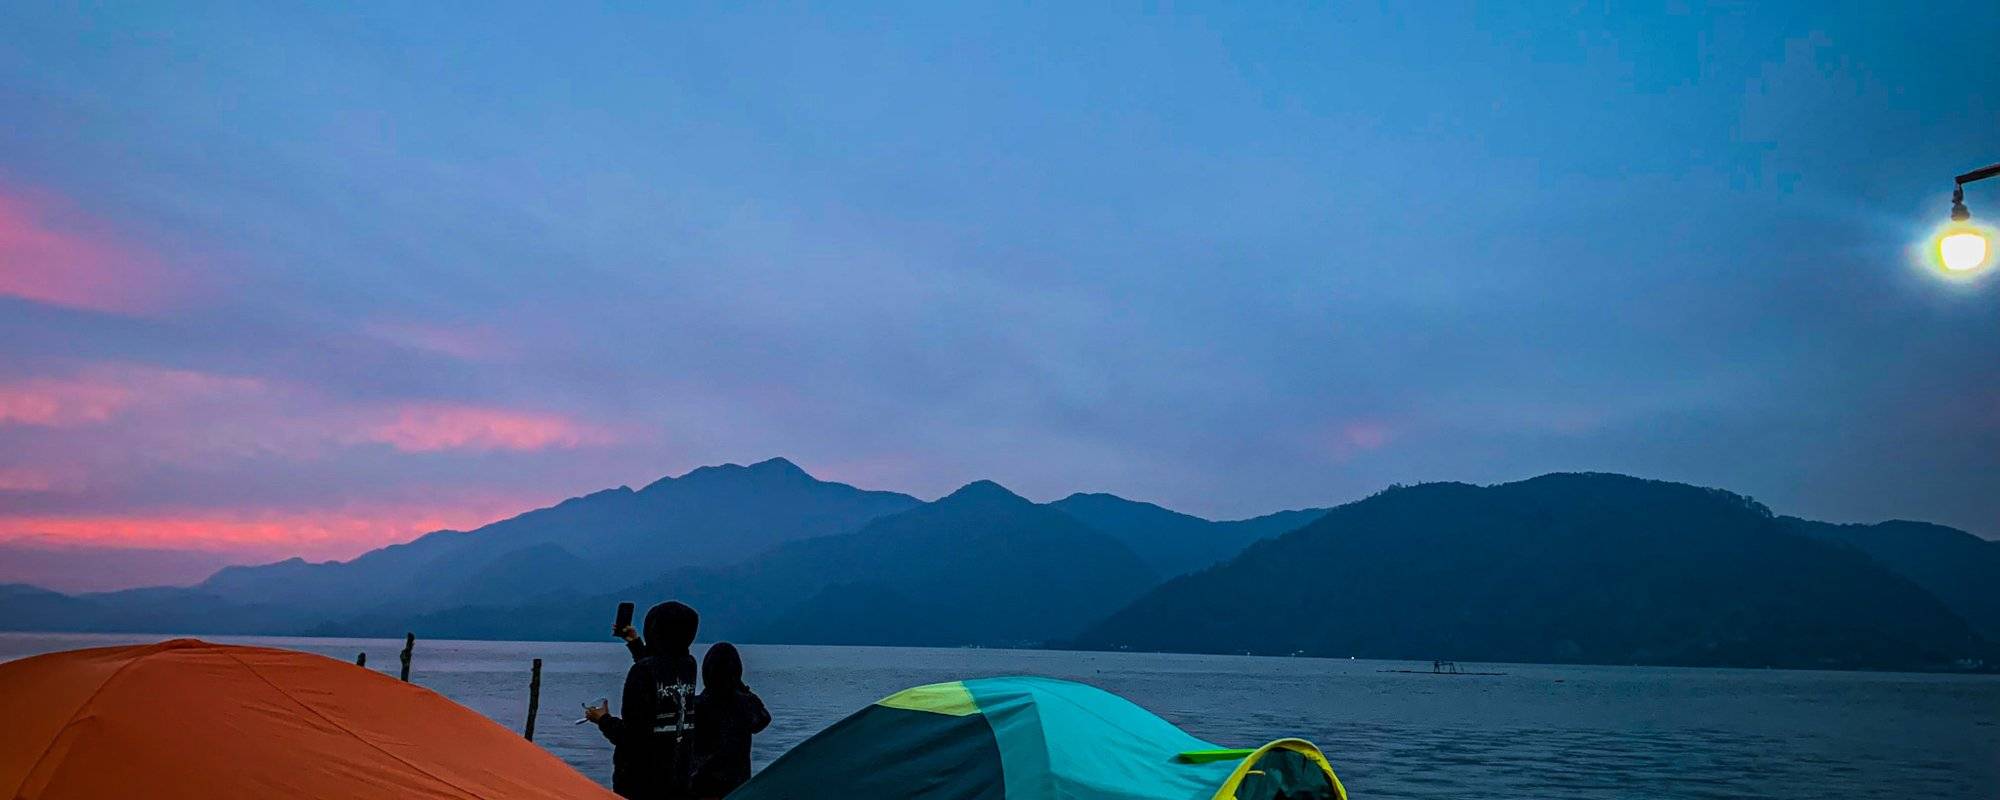 Camping by the Lake While Enjoying Nature and the Sunrise